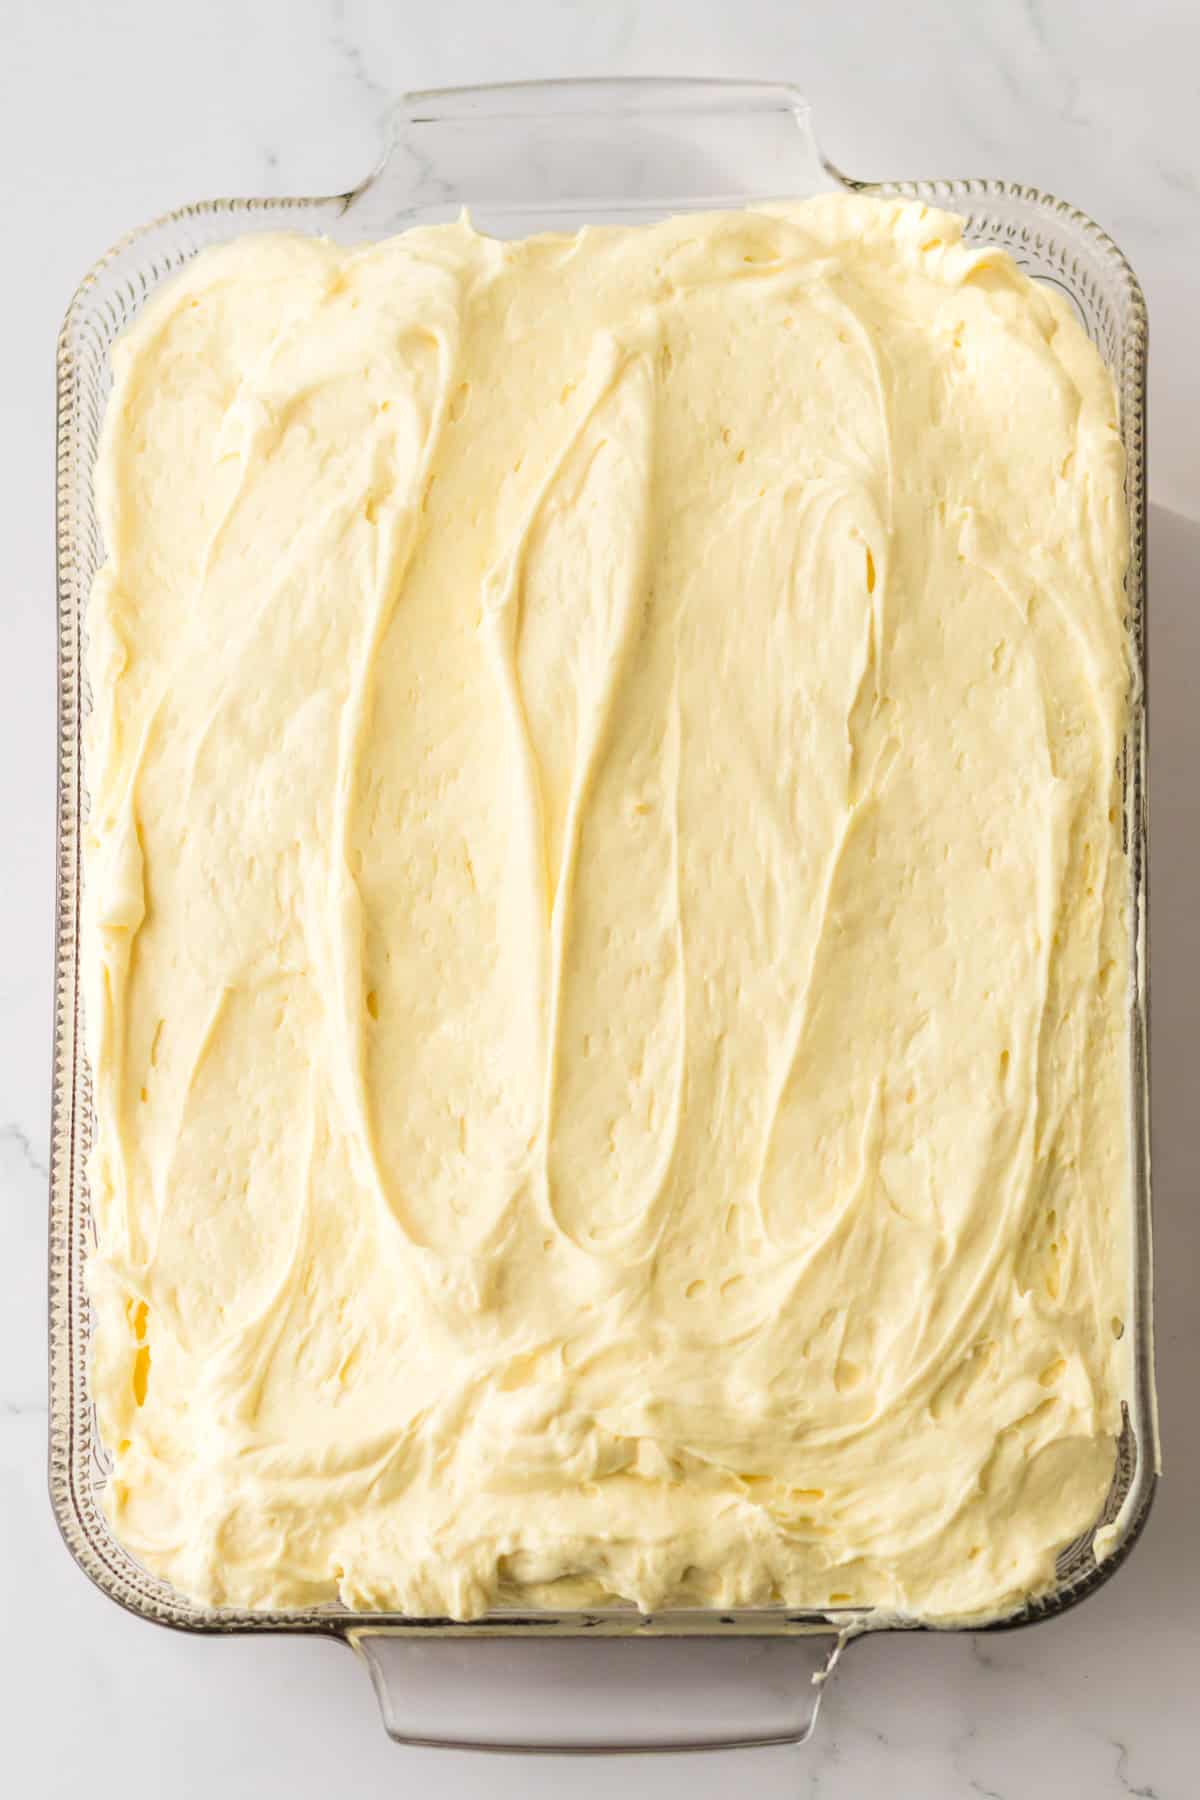 Cake topped with cream cheese pudding mixture spread into an even layer.